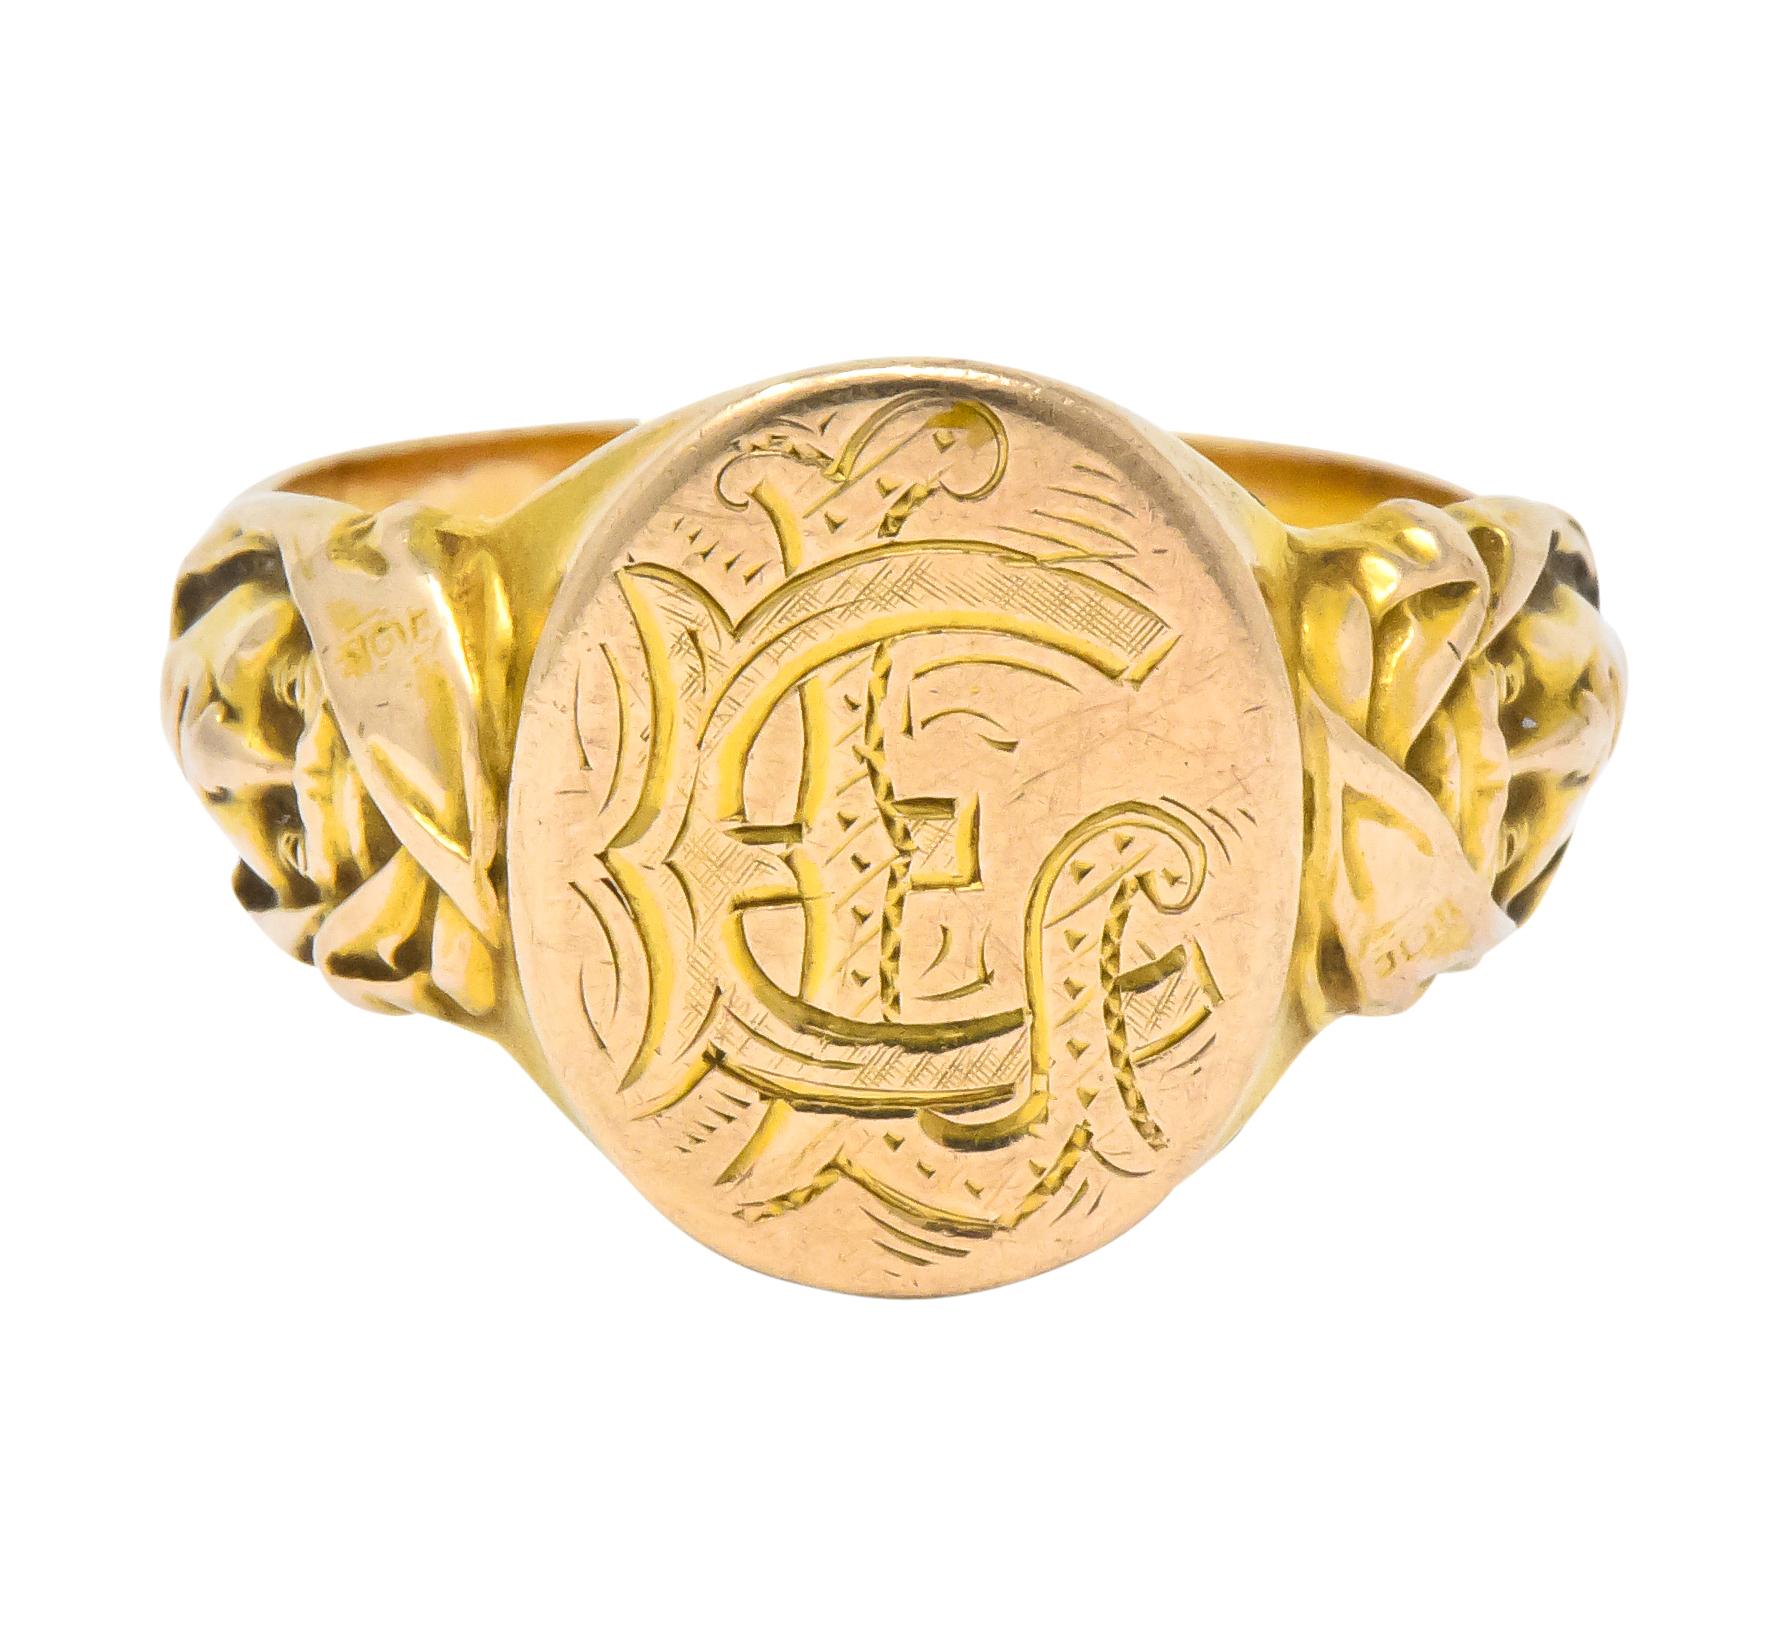 Signet ring deeply engraved with decorative intersecting initials 'EL'

Flanked by high relief cloaked faces as ring's shoulders

With maker's mark and tested as 14 karat gold

Ring Size: 9 & sizable

Top measures: 14.1 mm and sits 1.6 mm